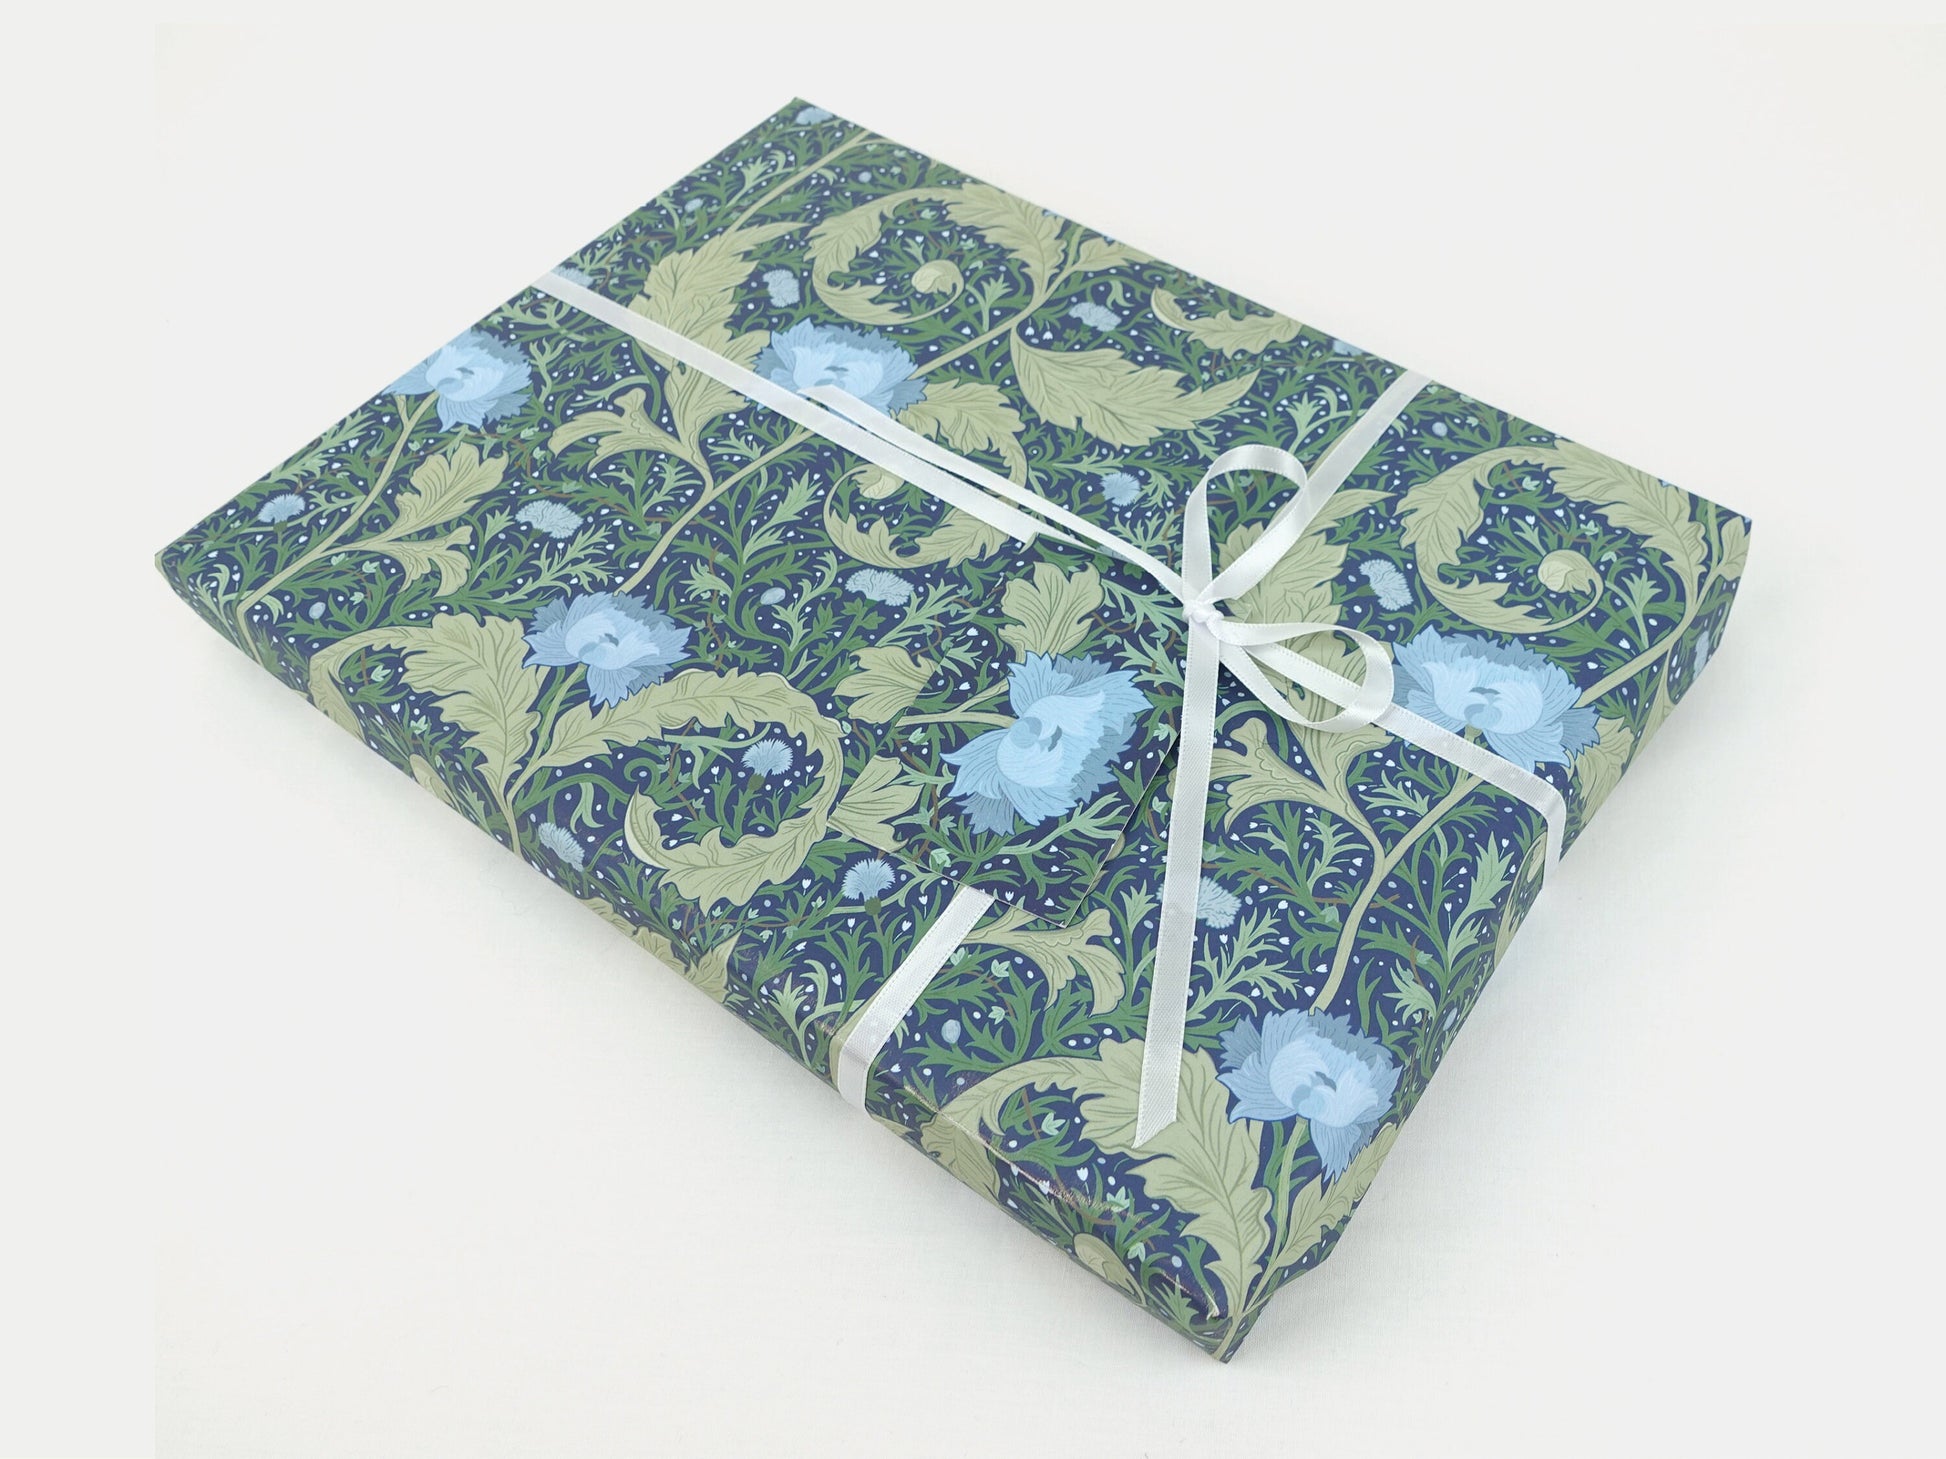 Floral wrapping paper | William Morris Inspired Eco friendly gift wrap | Premium quality sheets + Tags | Zero plastic packaging 70x50cm